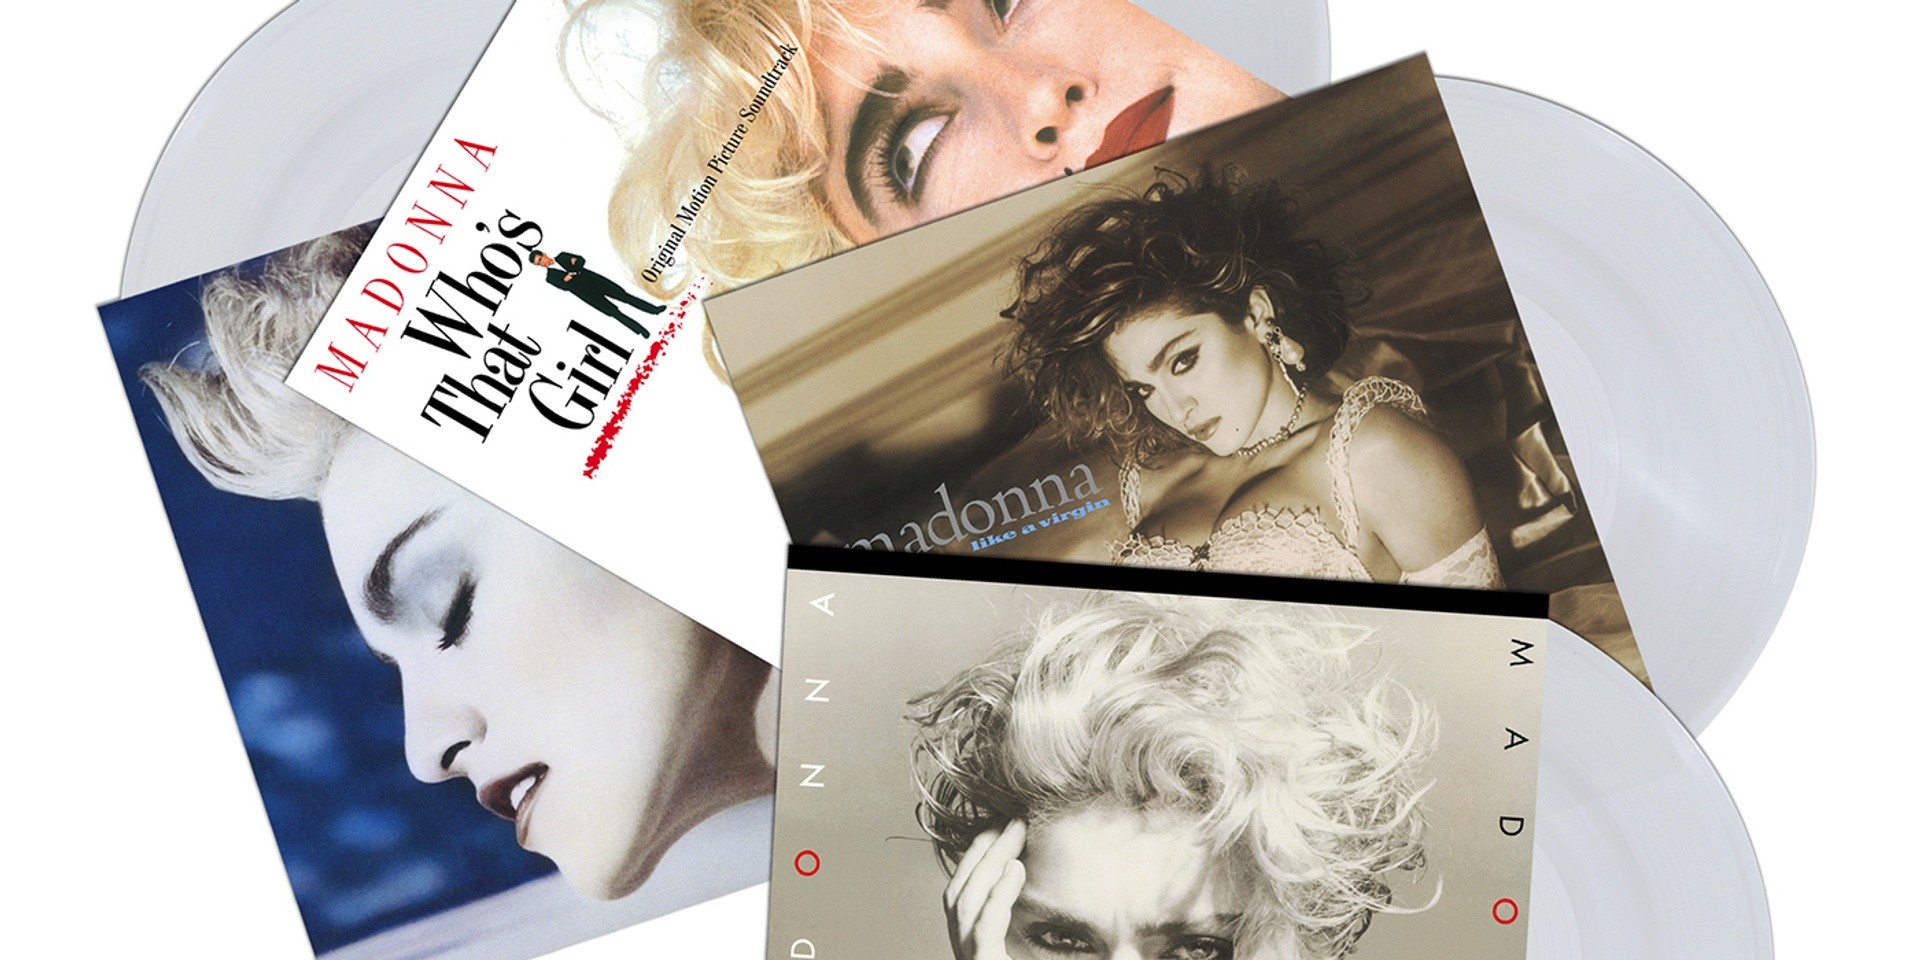 Madonna’s first four albums set for release on crystal clear vinyl